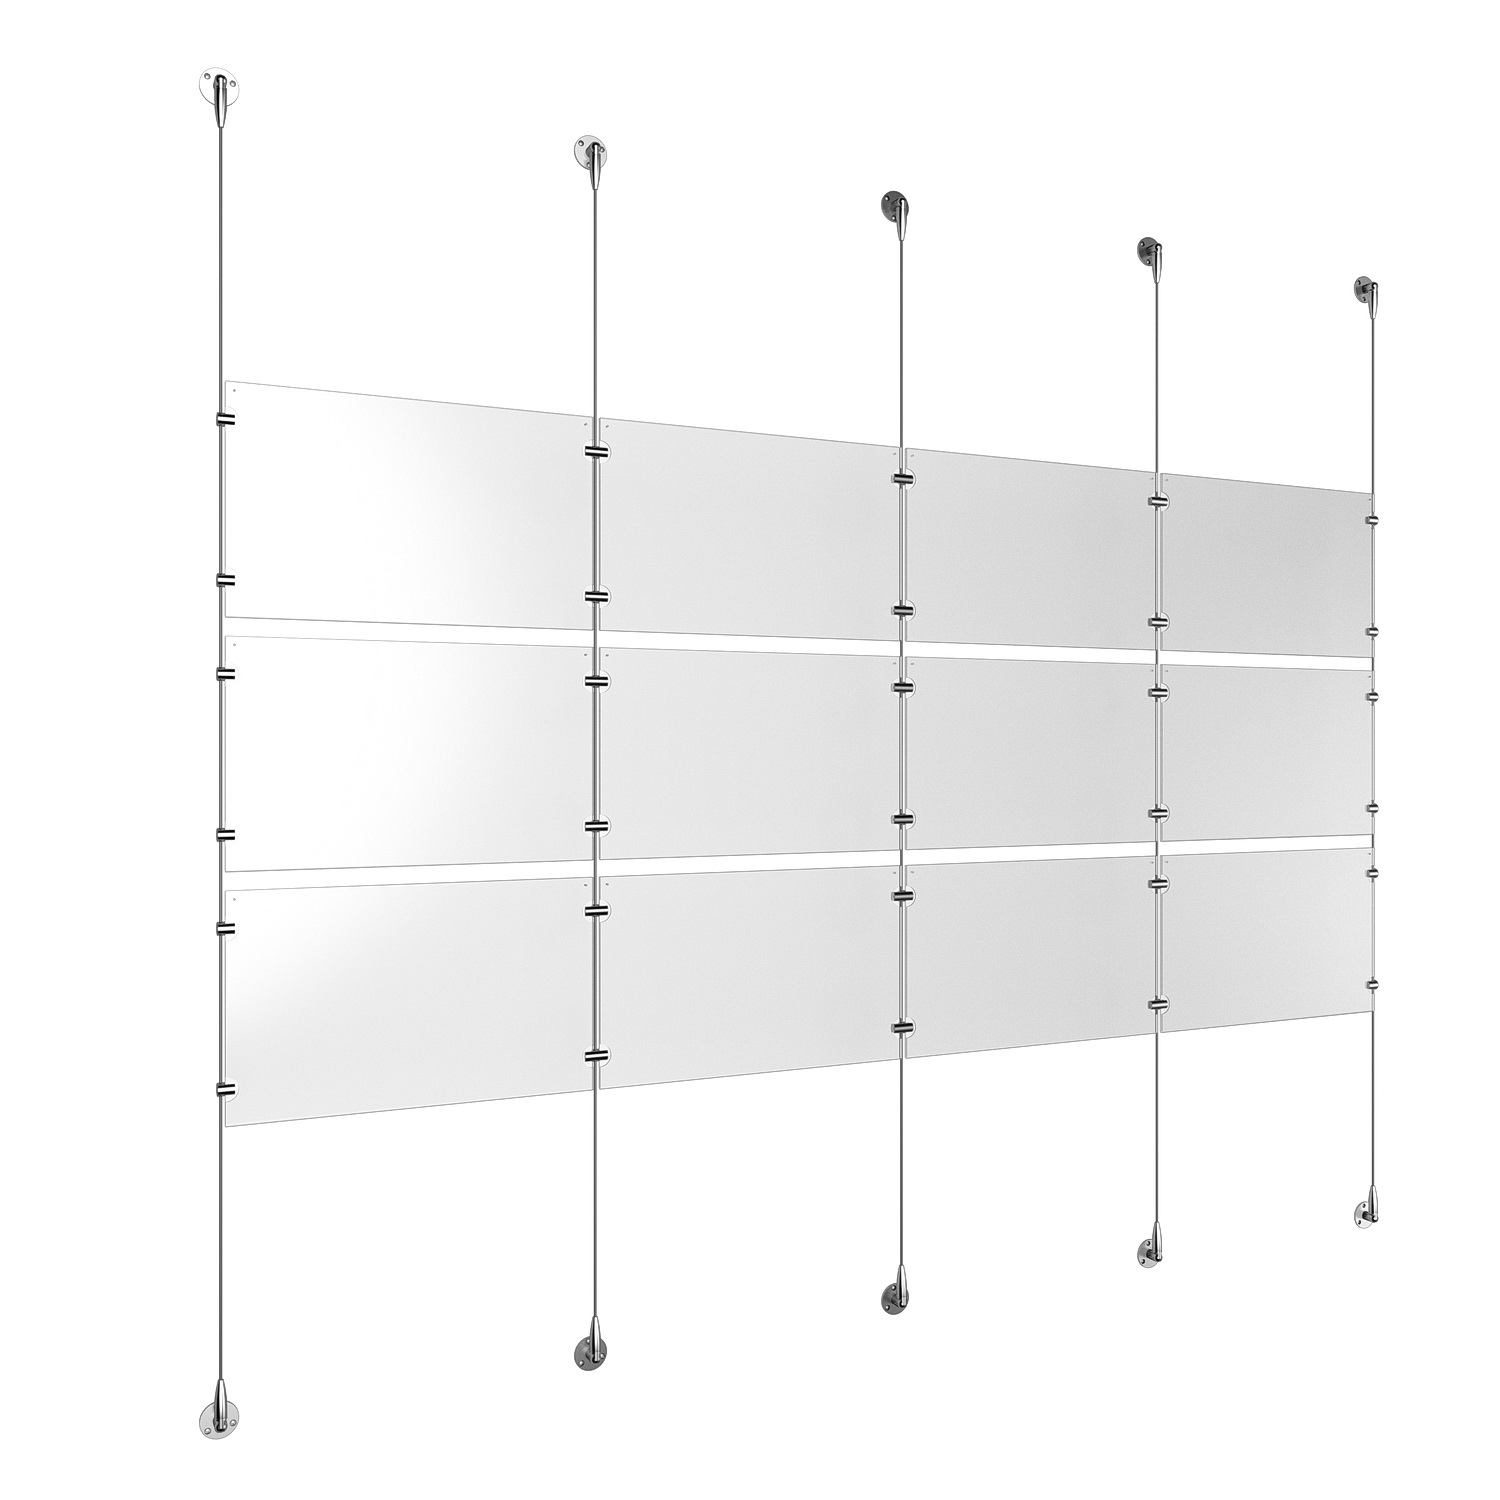 (12) 17'' Width x 11'' Height Clear Acrylic Frame & (5) Stainless Steel Satin Brushed Adjustable Angle Signature 1/8'' Cable Systems with (12) Single-Sided Panel Grippers (18) Double-Sided Panel Grippers